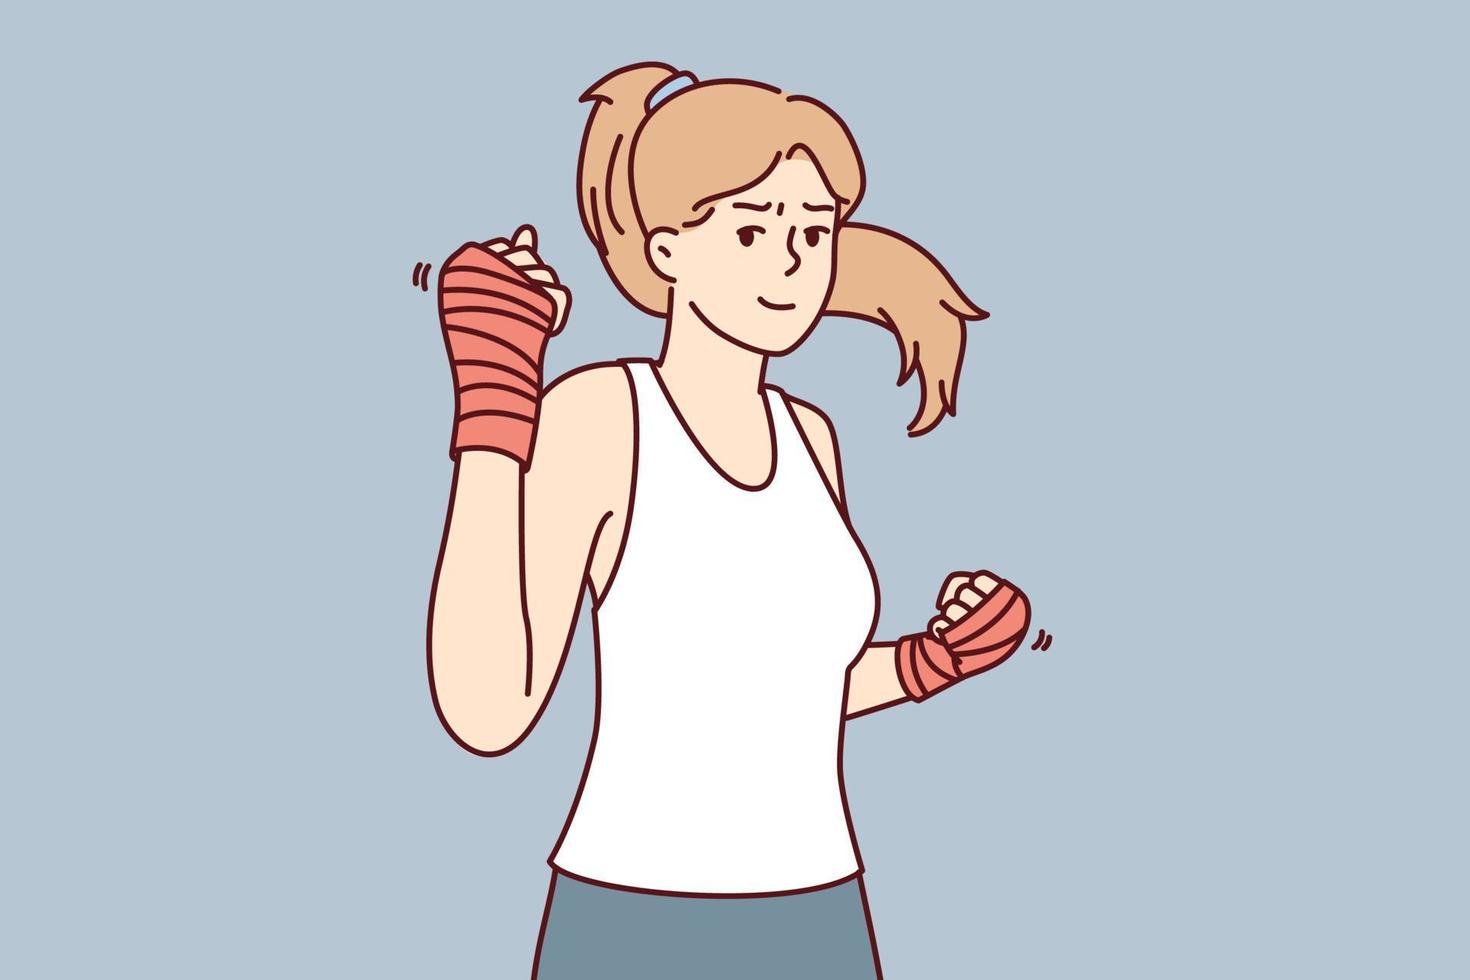 Strong woman with boxing bandages on hands looks at camera inviting to fight or play sports. Beautiful athletic girl is engaged in fitness or learning self-defense techniques. Flat vector image